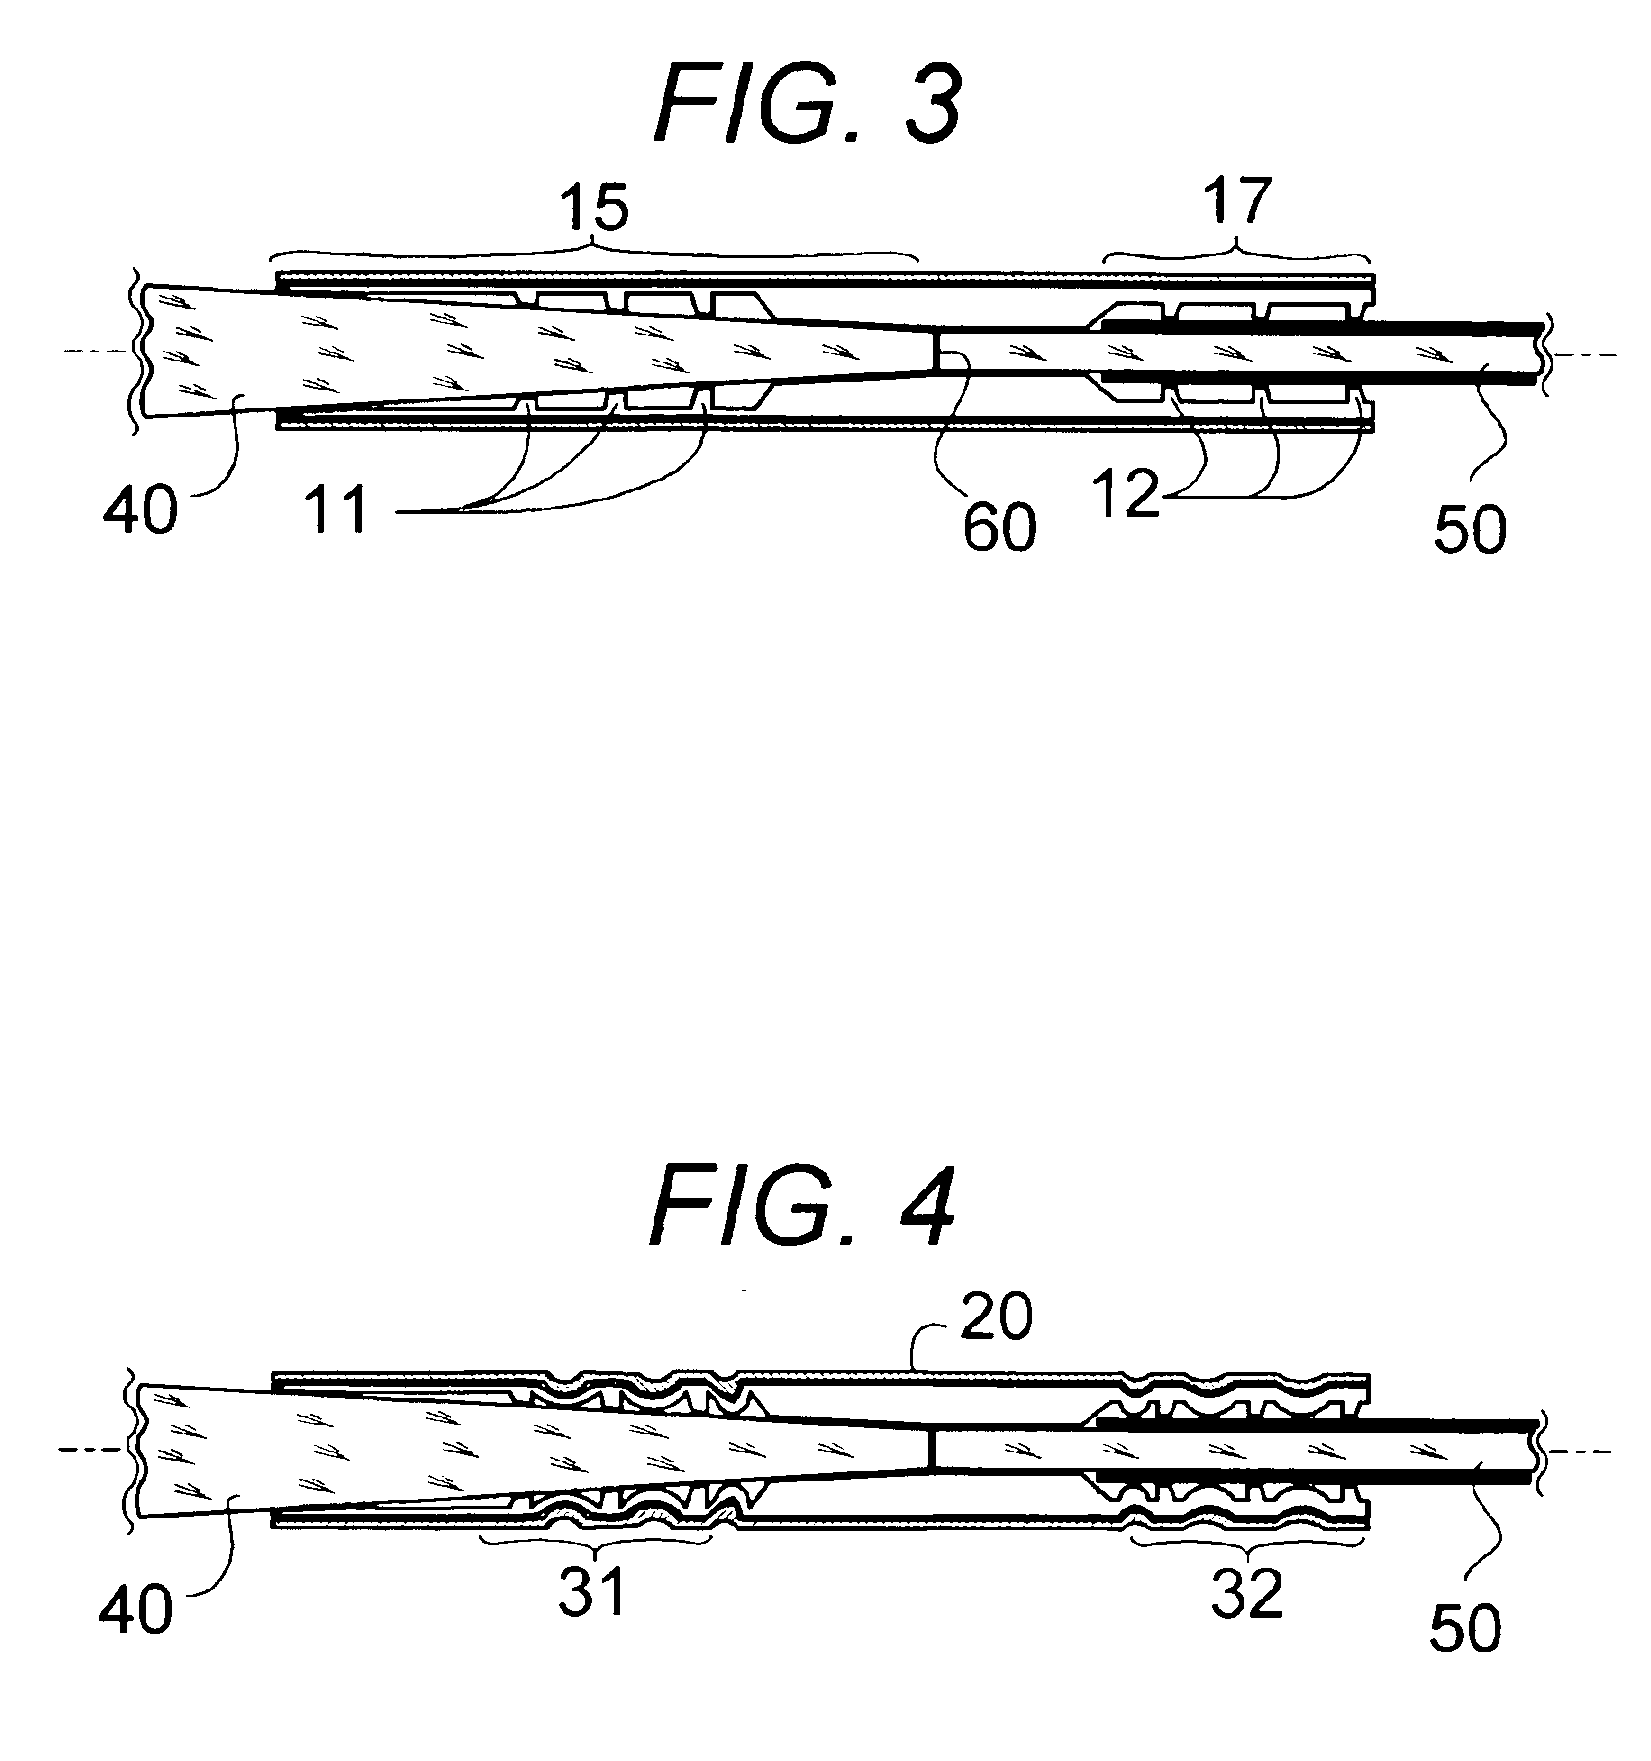 Coupling a tapered optical element to an optical fiber